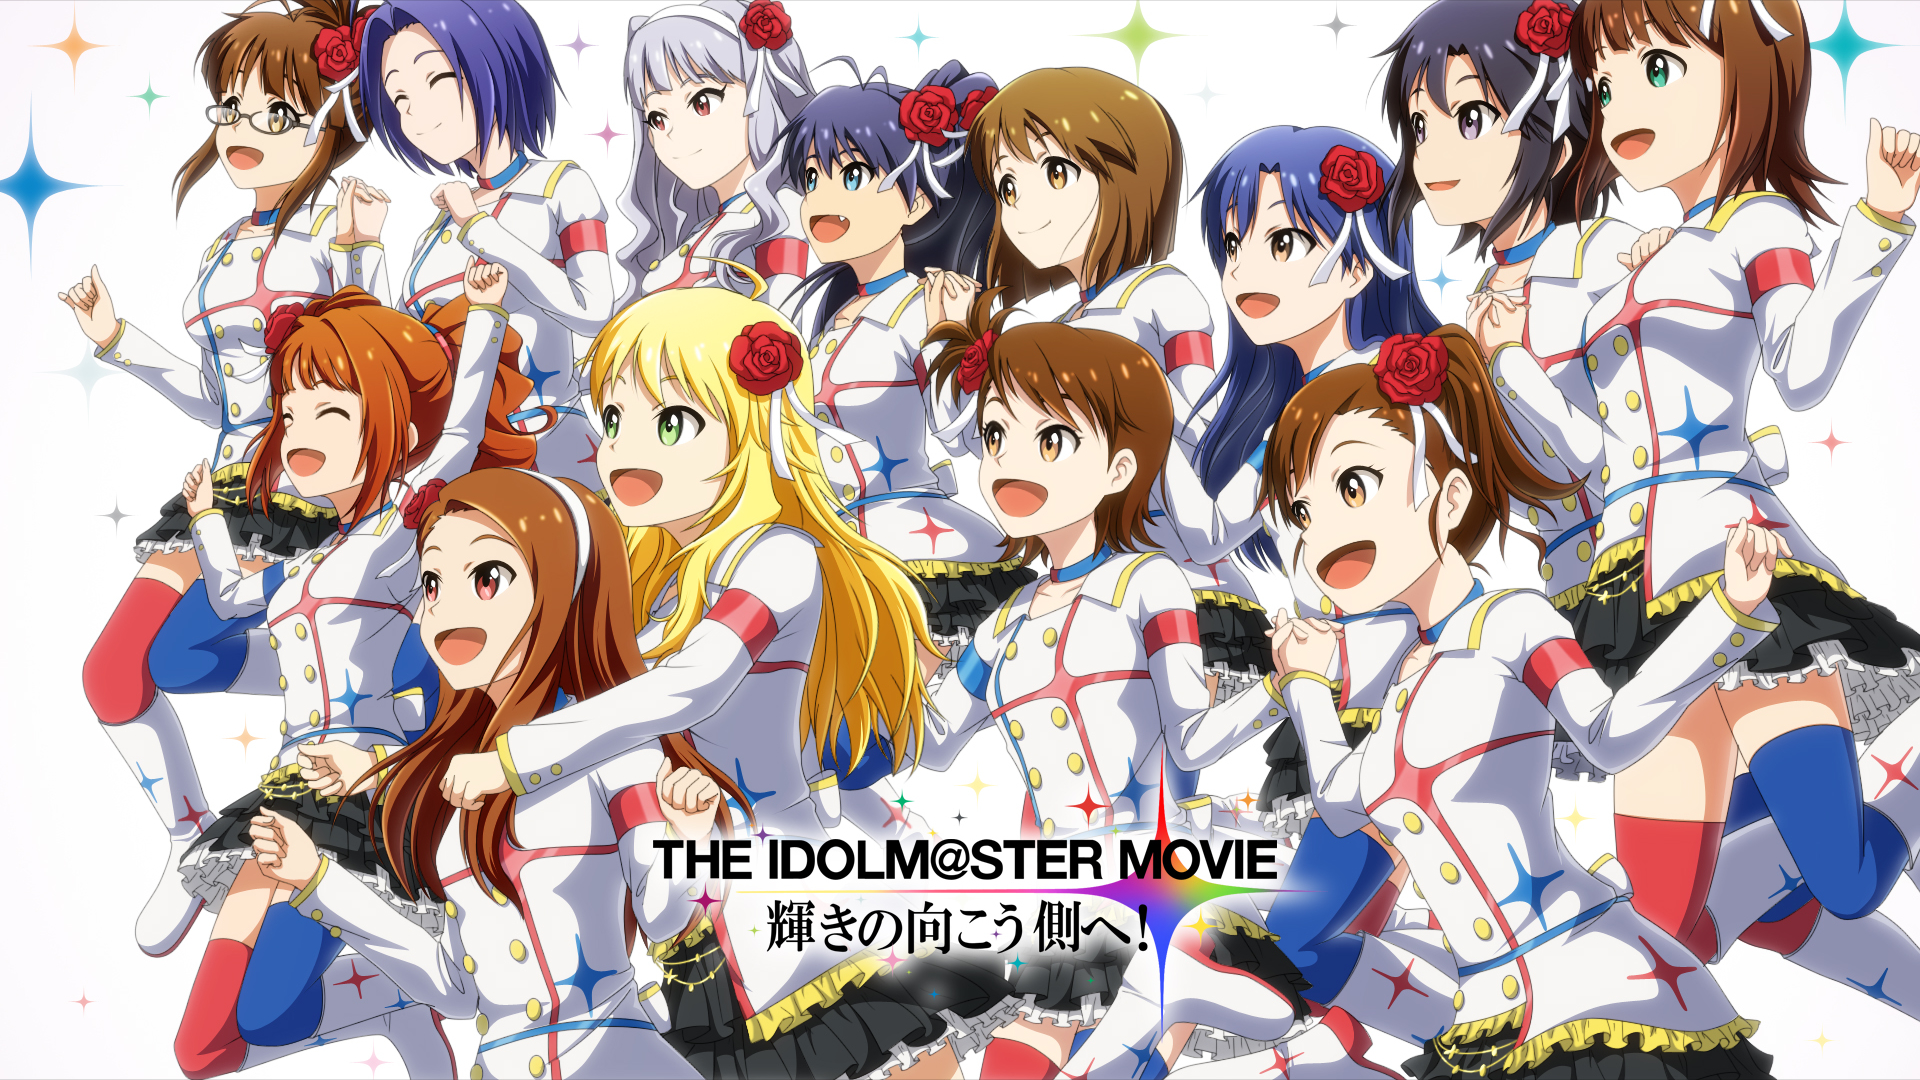 Anime The iDOLM@STER HD Wallpaper by こうちょう